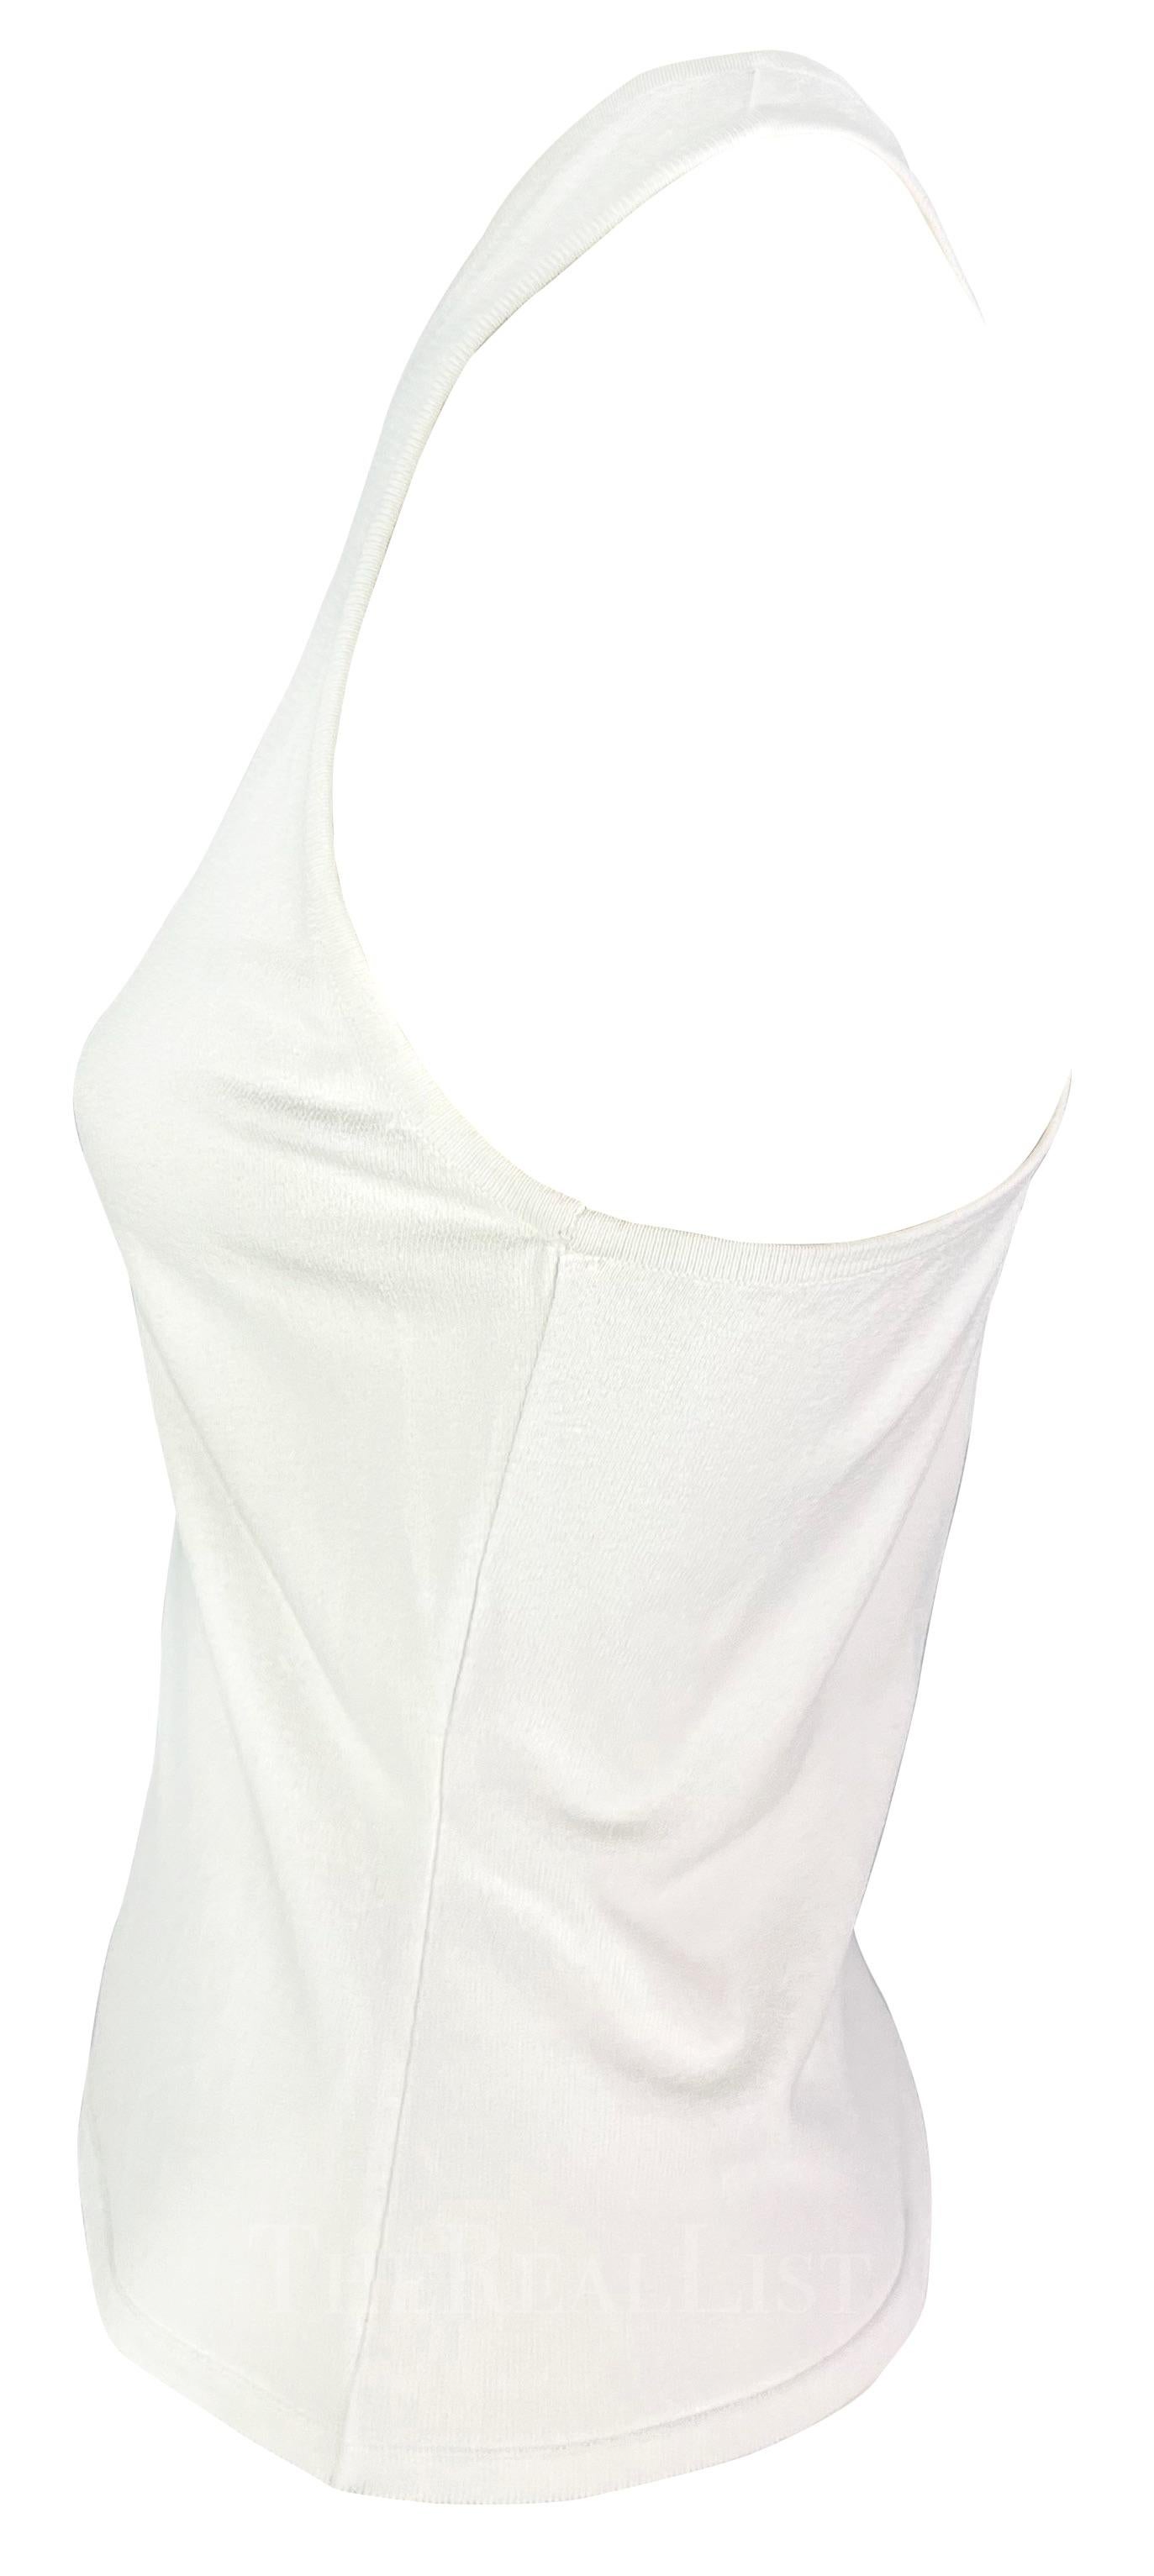 S/S 1998 Gucci by Tom Ford White Stretch Knit Racerback Tank Top en vente 3